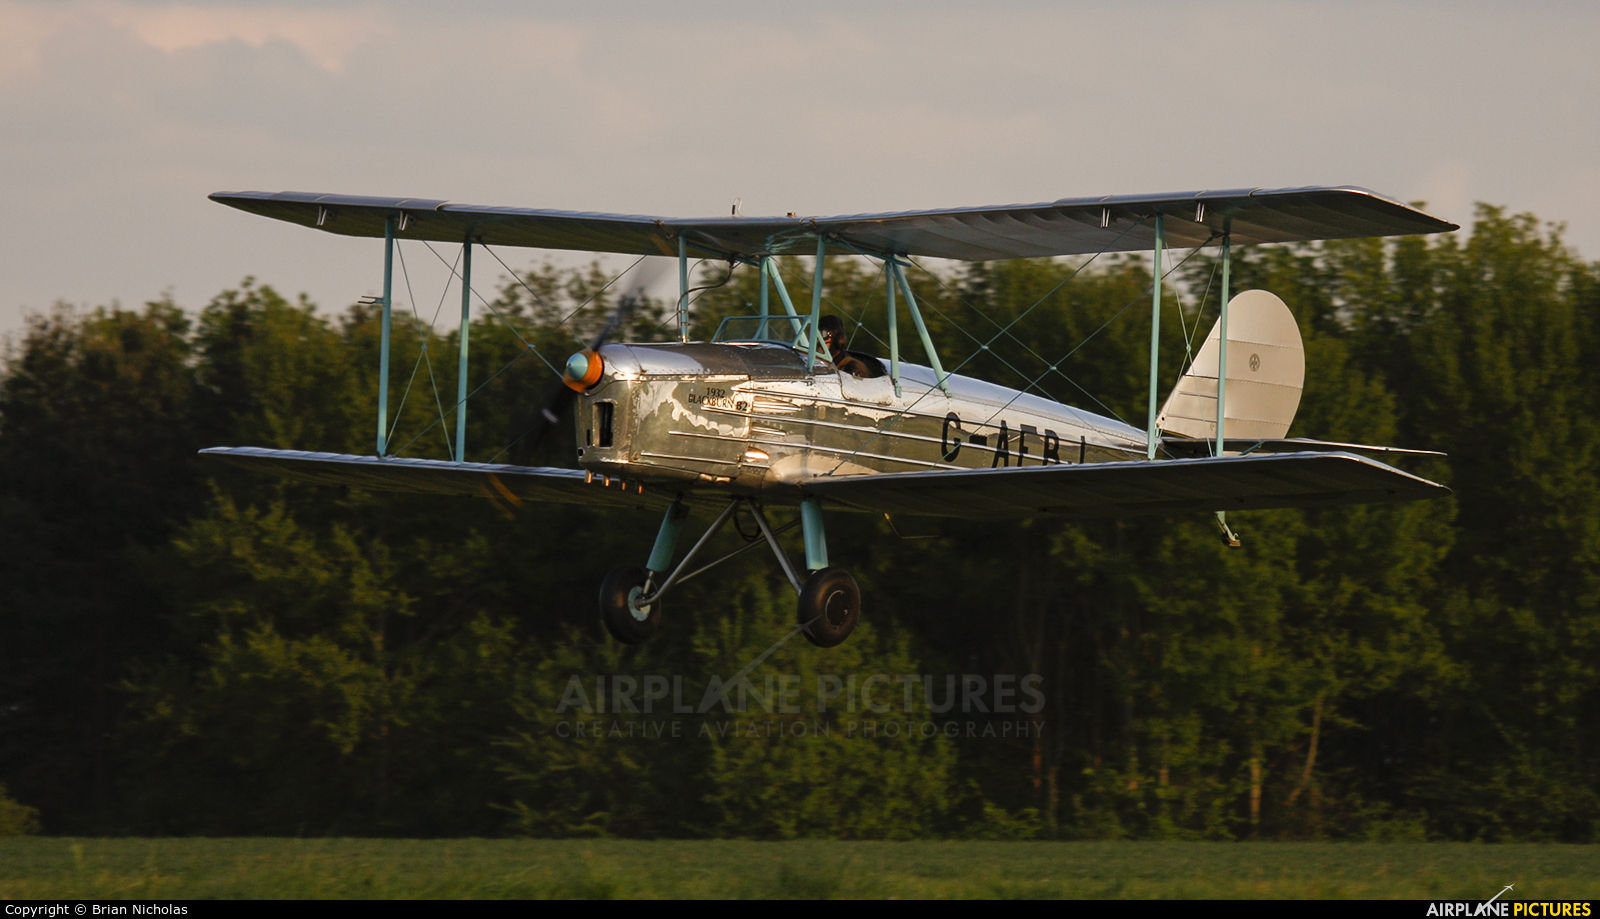 The Shuttleworth Collection G-AEBJ aircraft at Old Warden